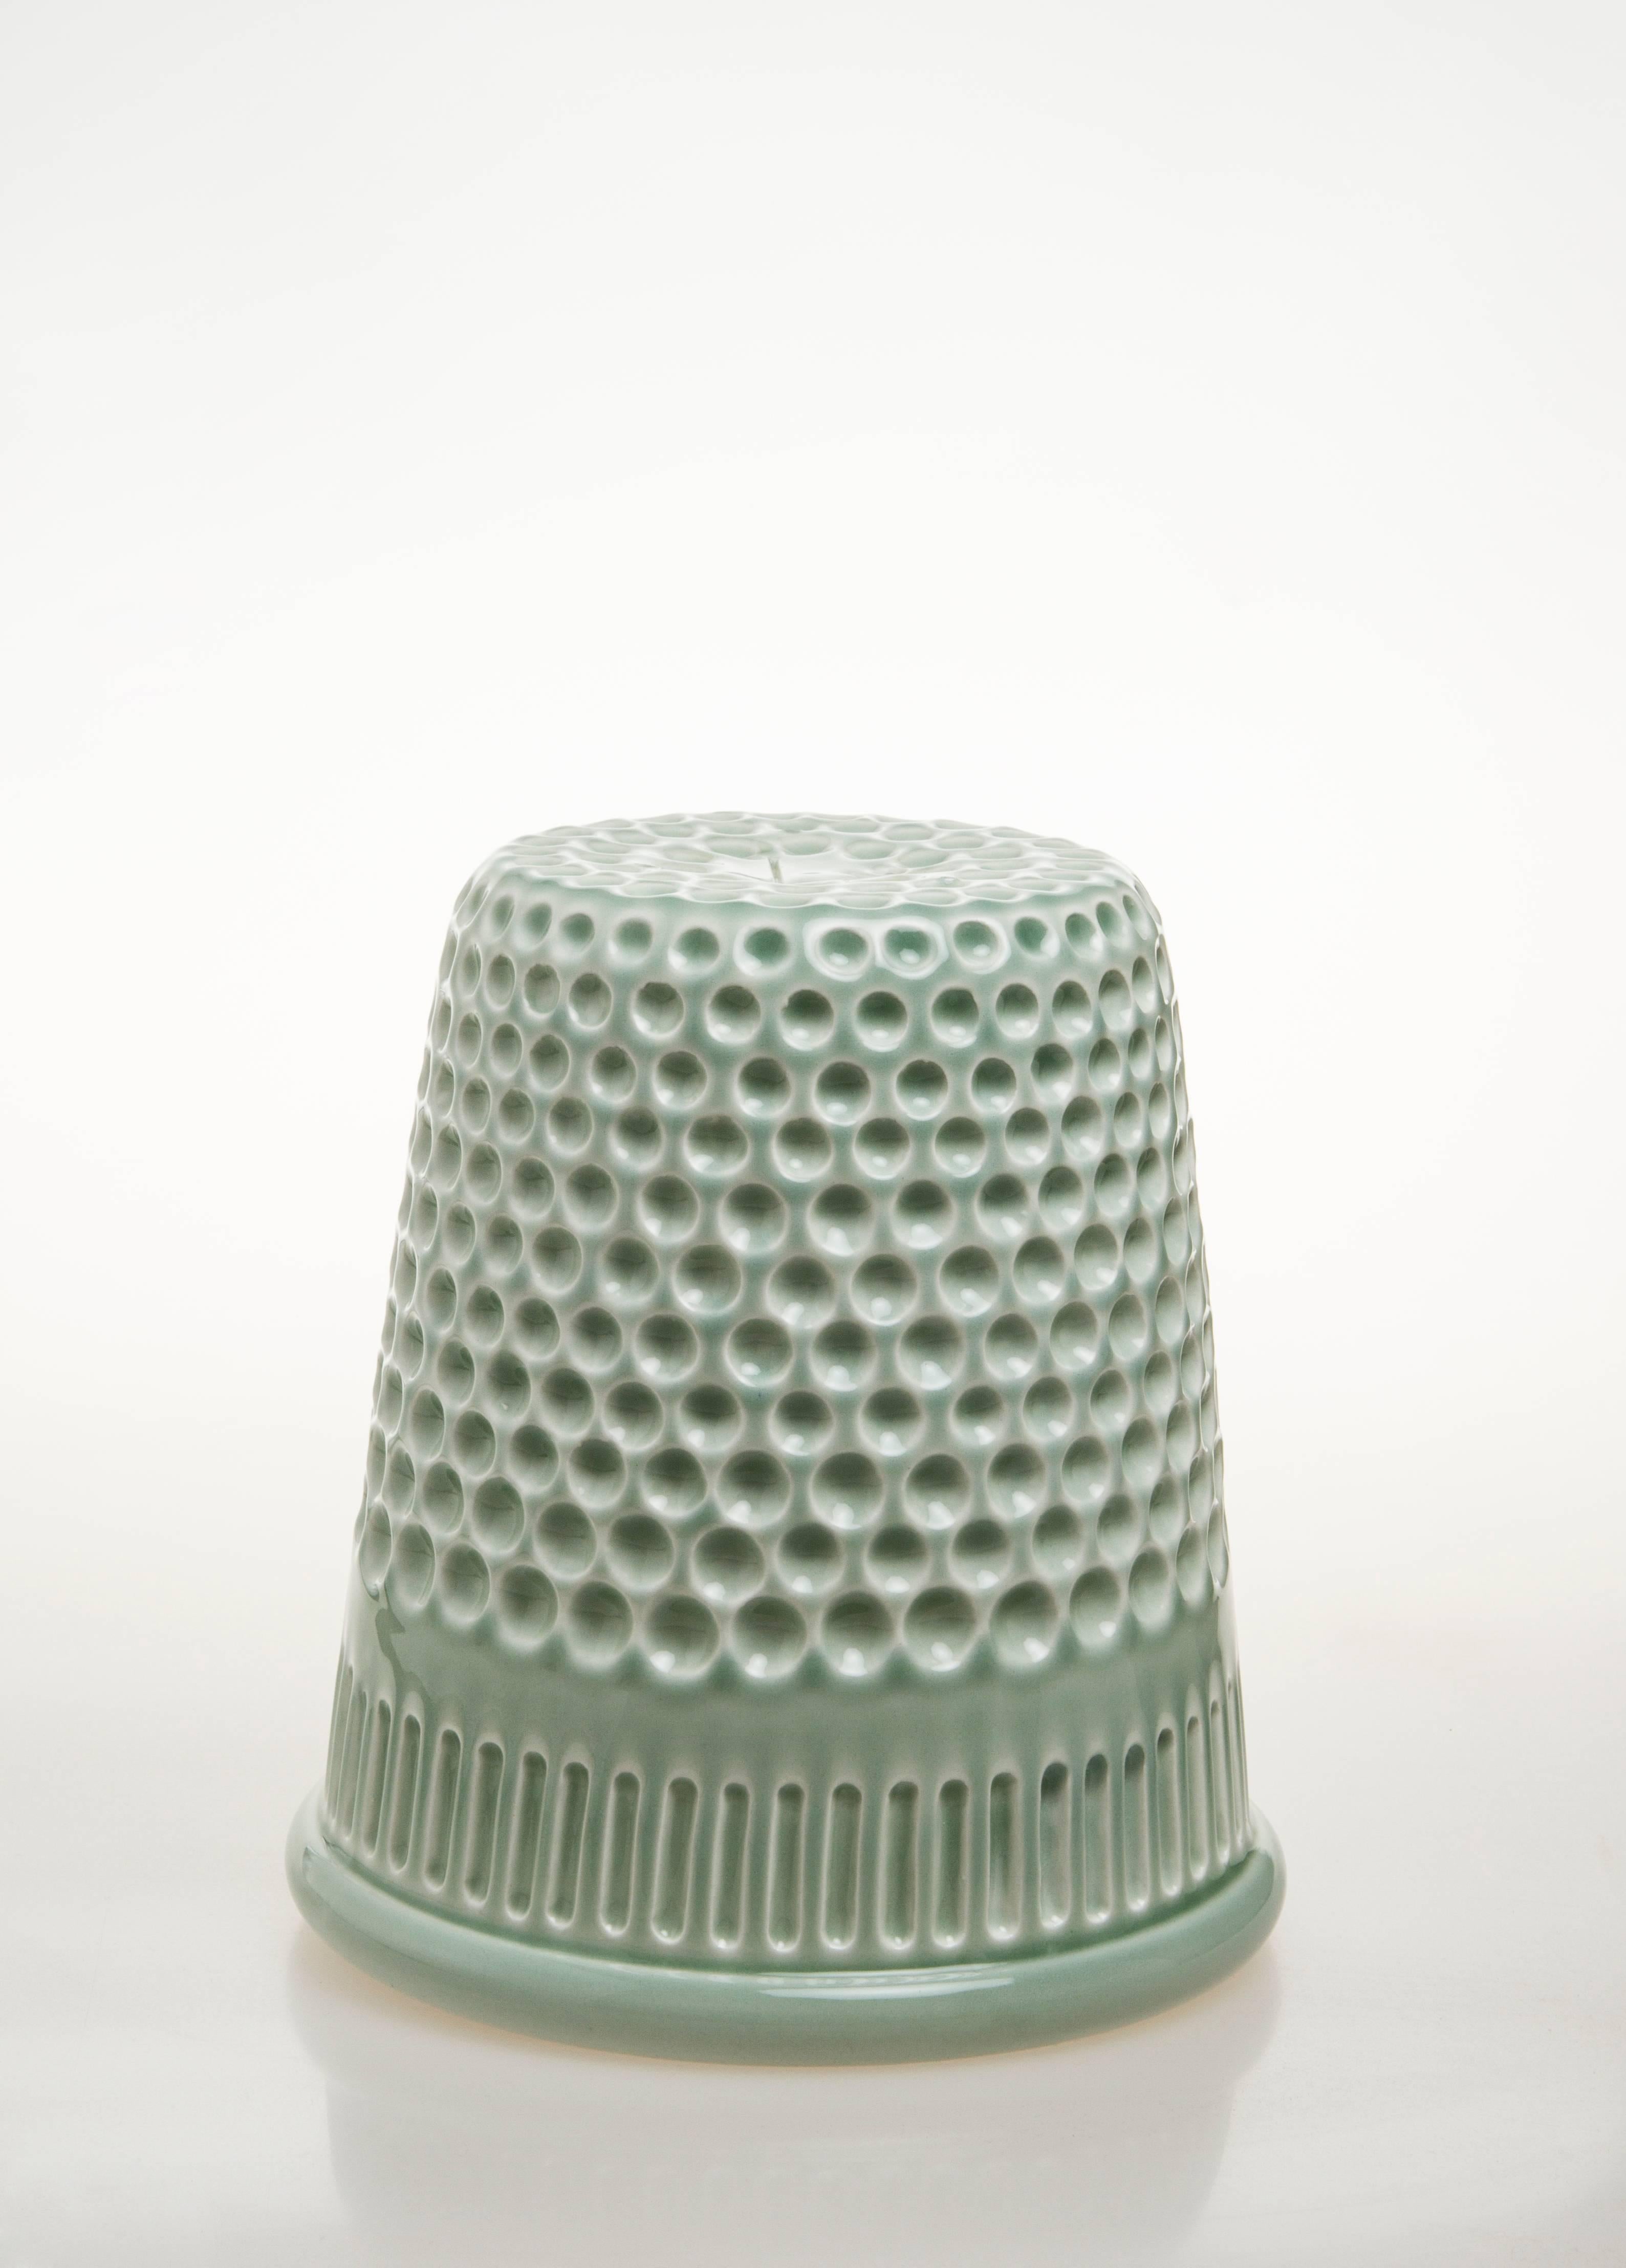 Other InDito Sage Vase by Vito Nesta, Made in Italy For Sale